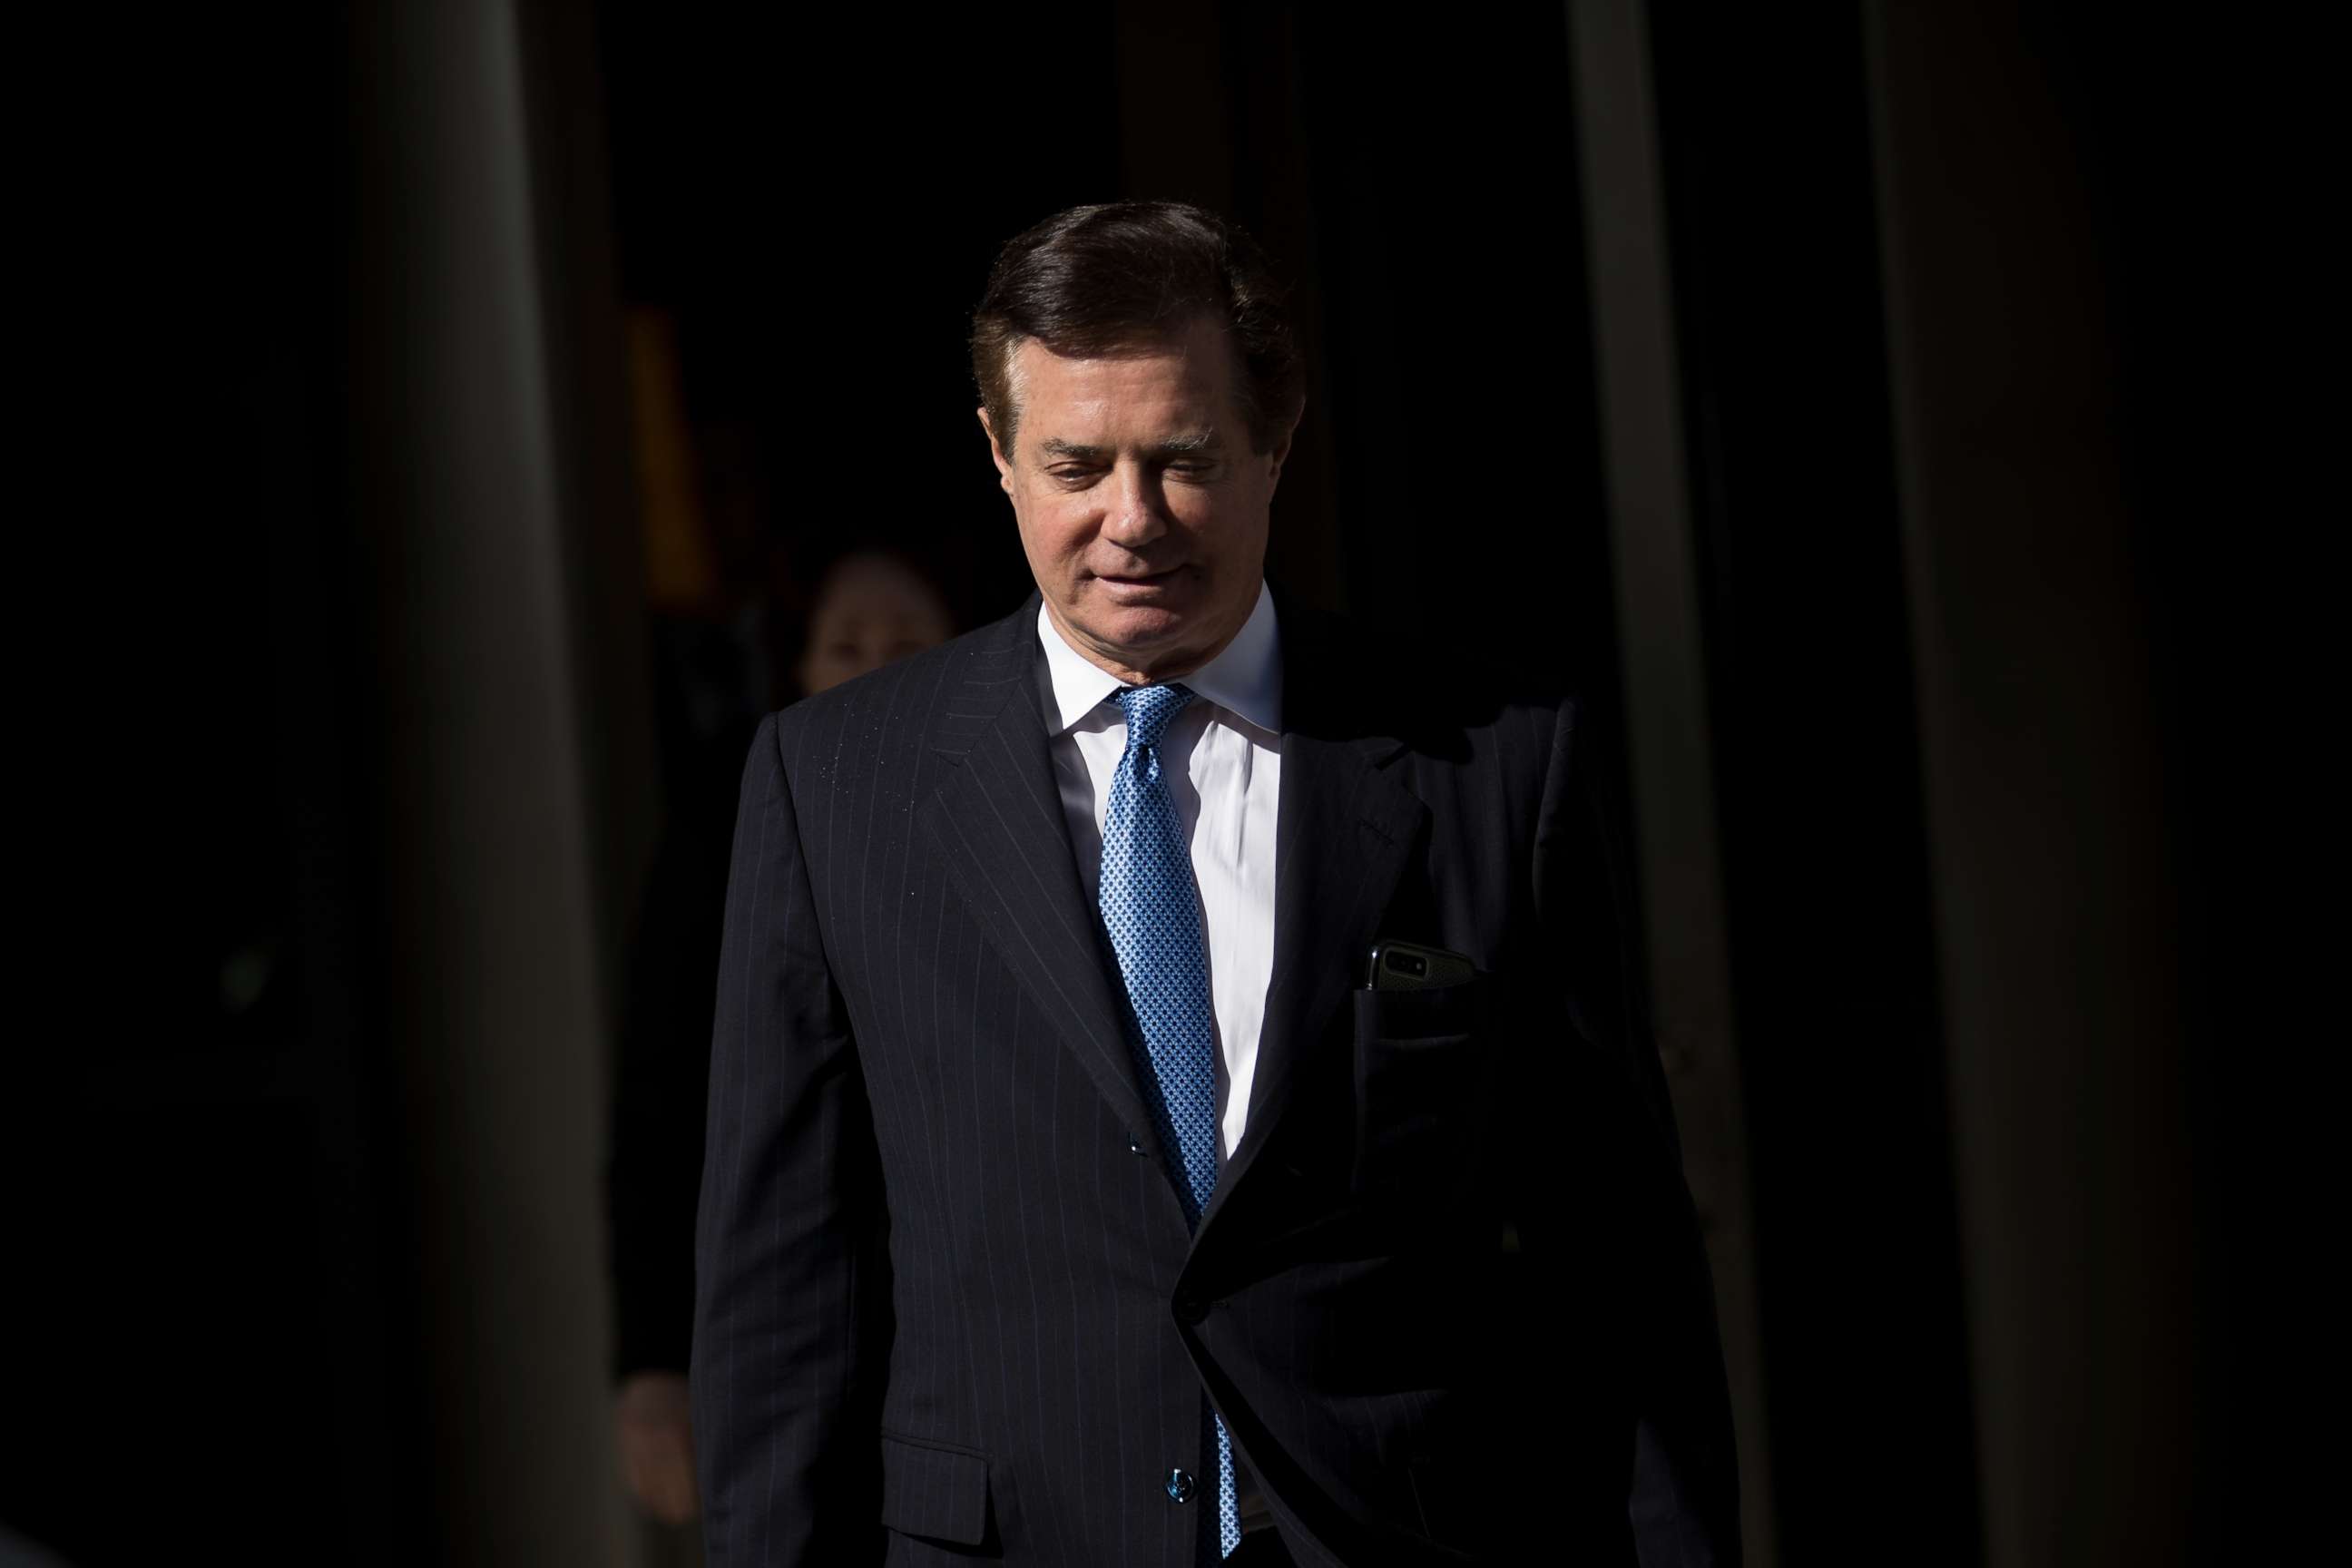 PHOTO: Paul Manafort, former campaign manager for Donald Trump, exits the E. Barrett Prettyman Federal Courthouse on Feb. 28, 2018, in Washington, D.C.